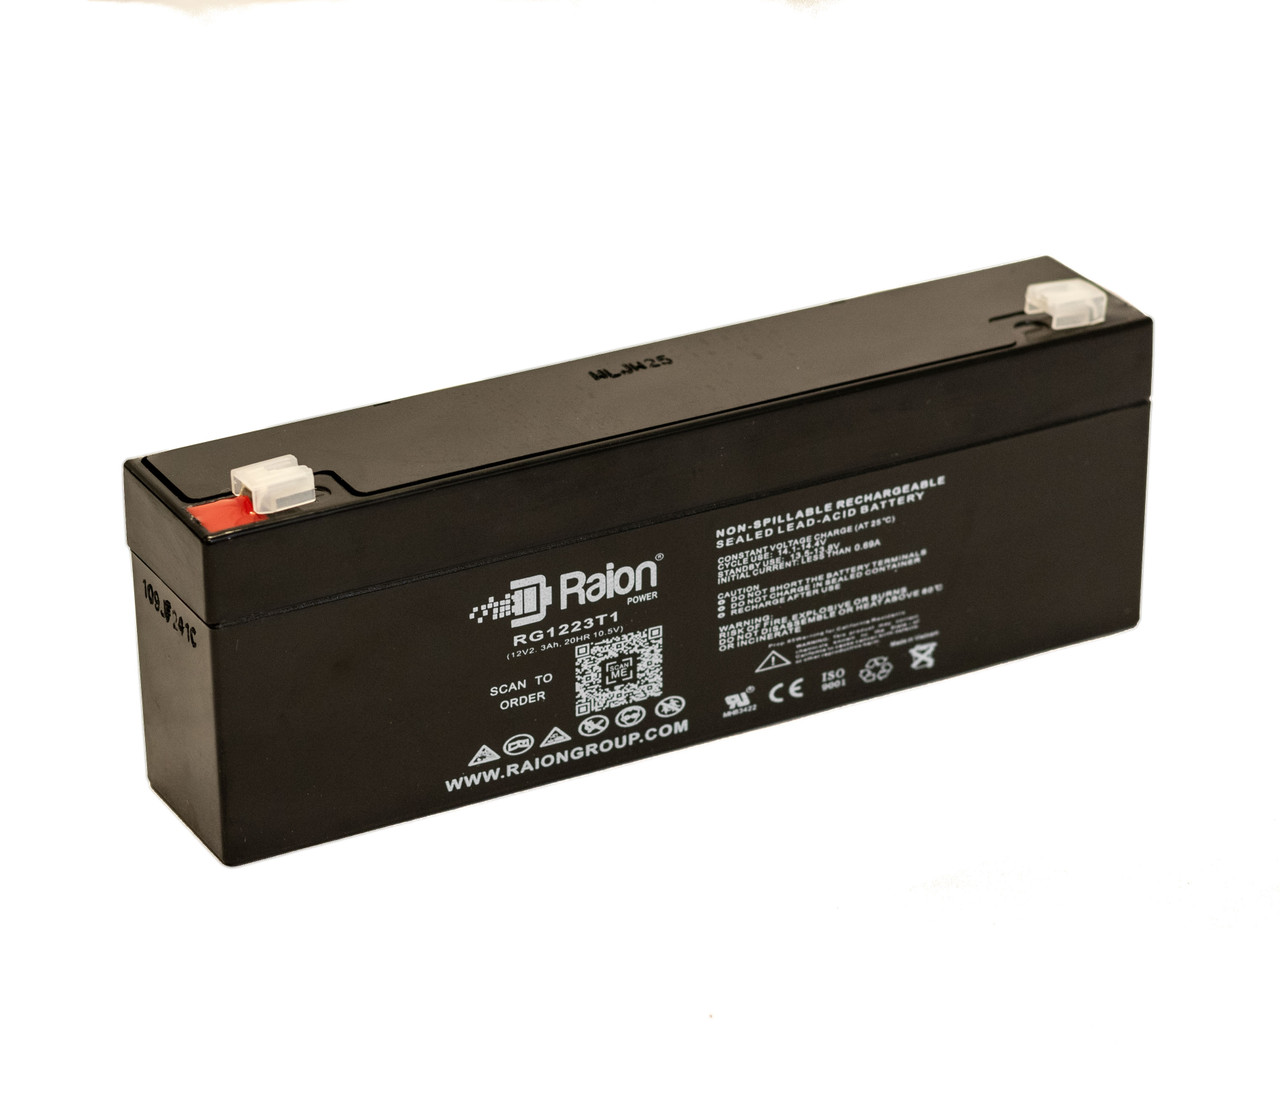 Raion Power RG1223T1 Replacement Battery for SBB 6FM2.3